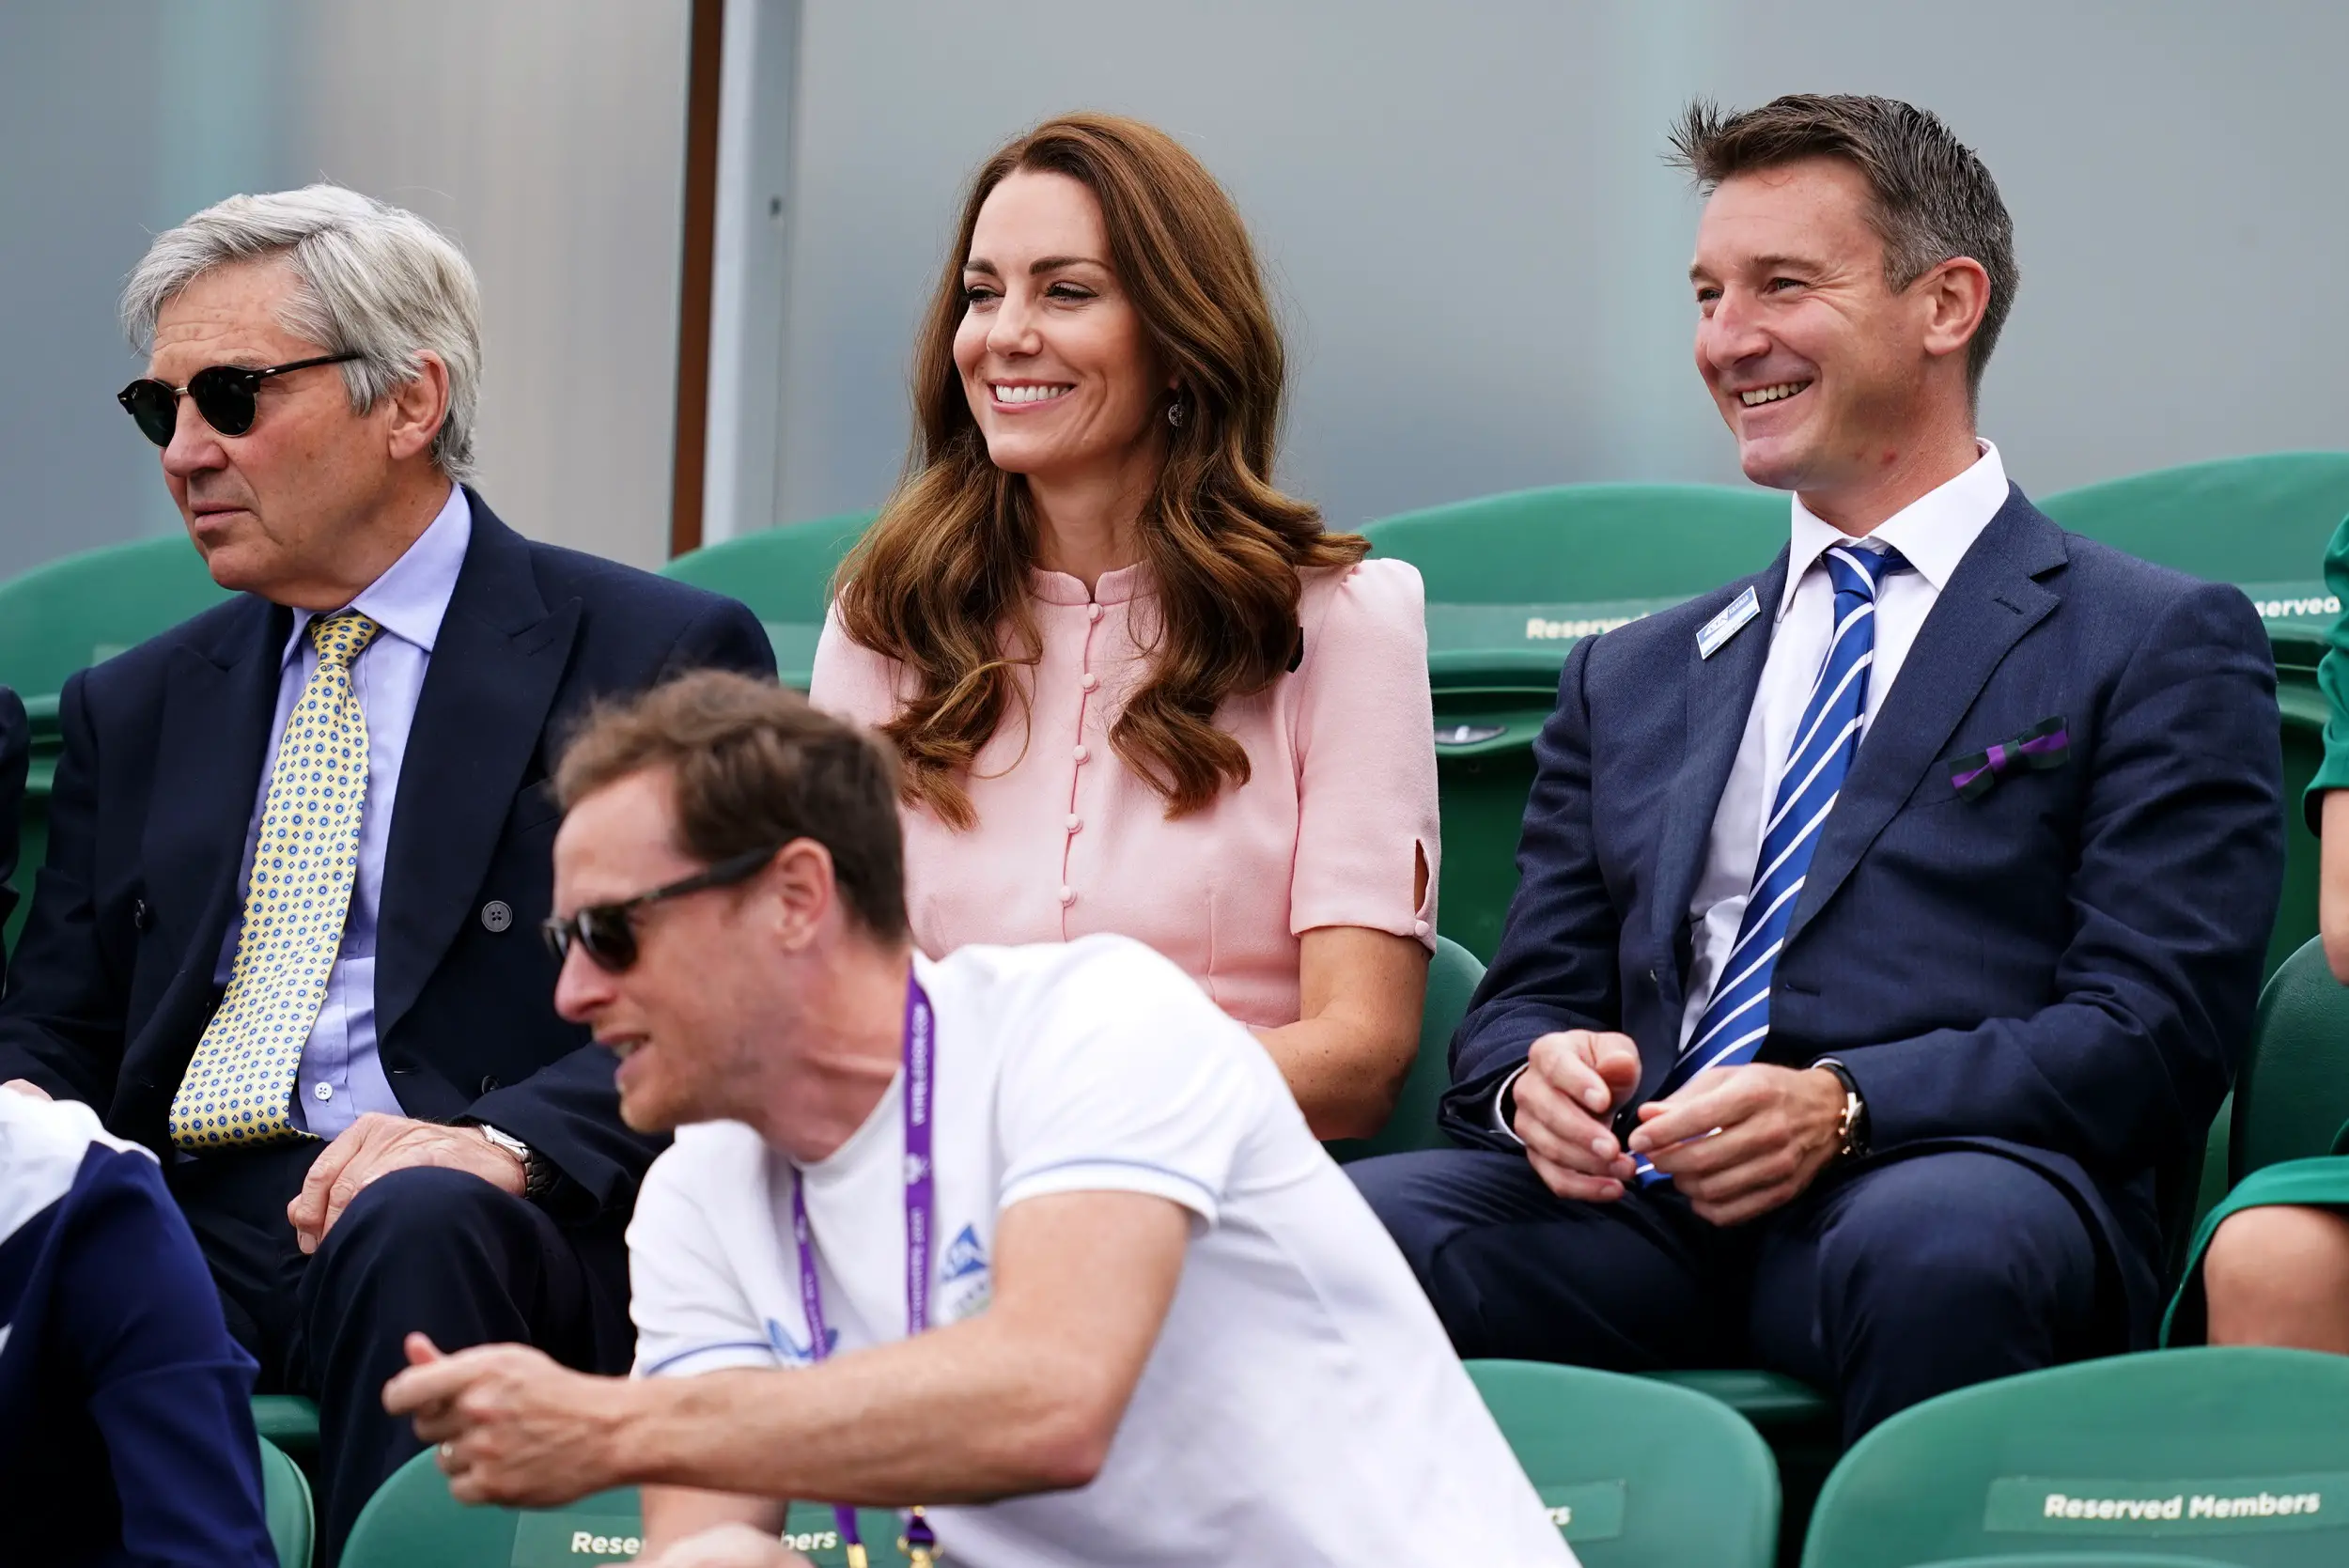 The Duchess of Cambridge and her father Michael Middleton at Wimbledon last day in July 2021